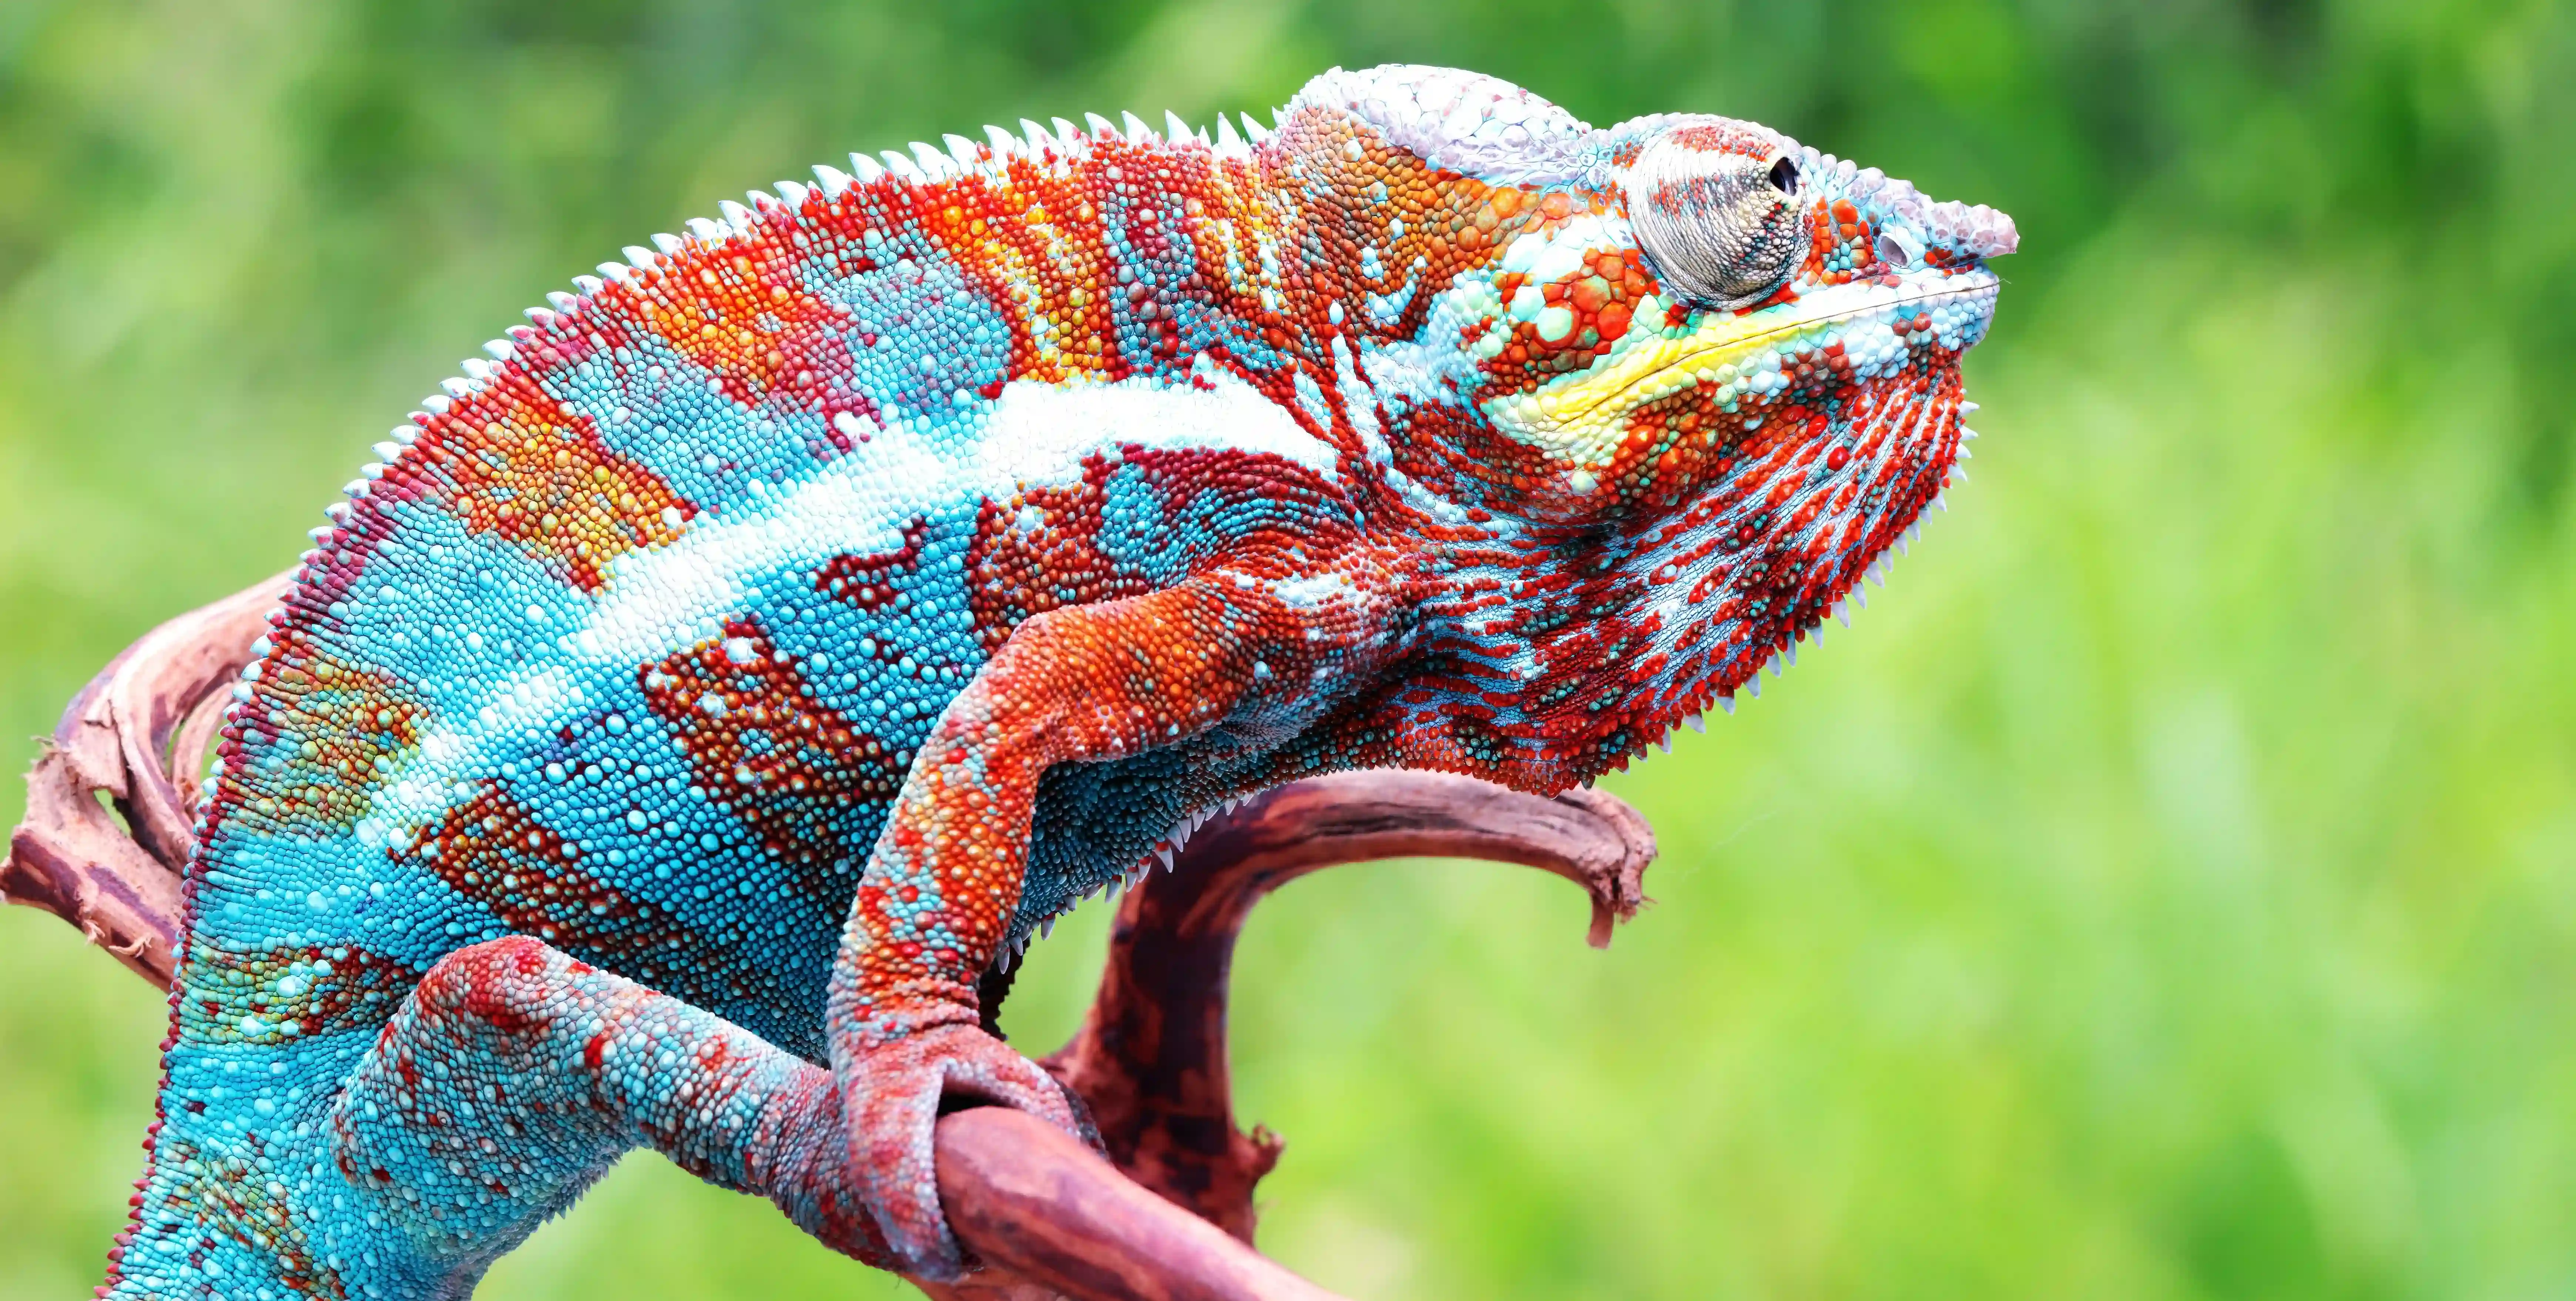 Why does skin colour change in chameleons but not in humans?